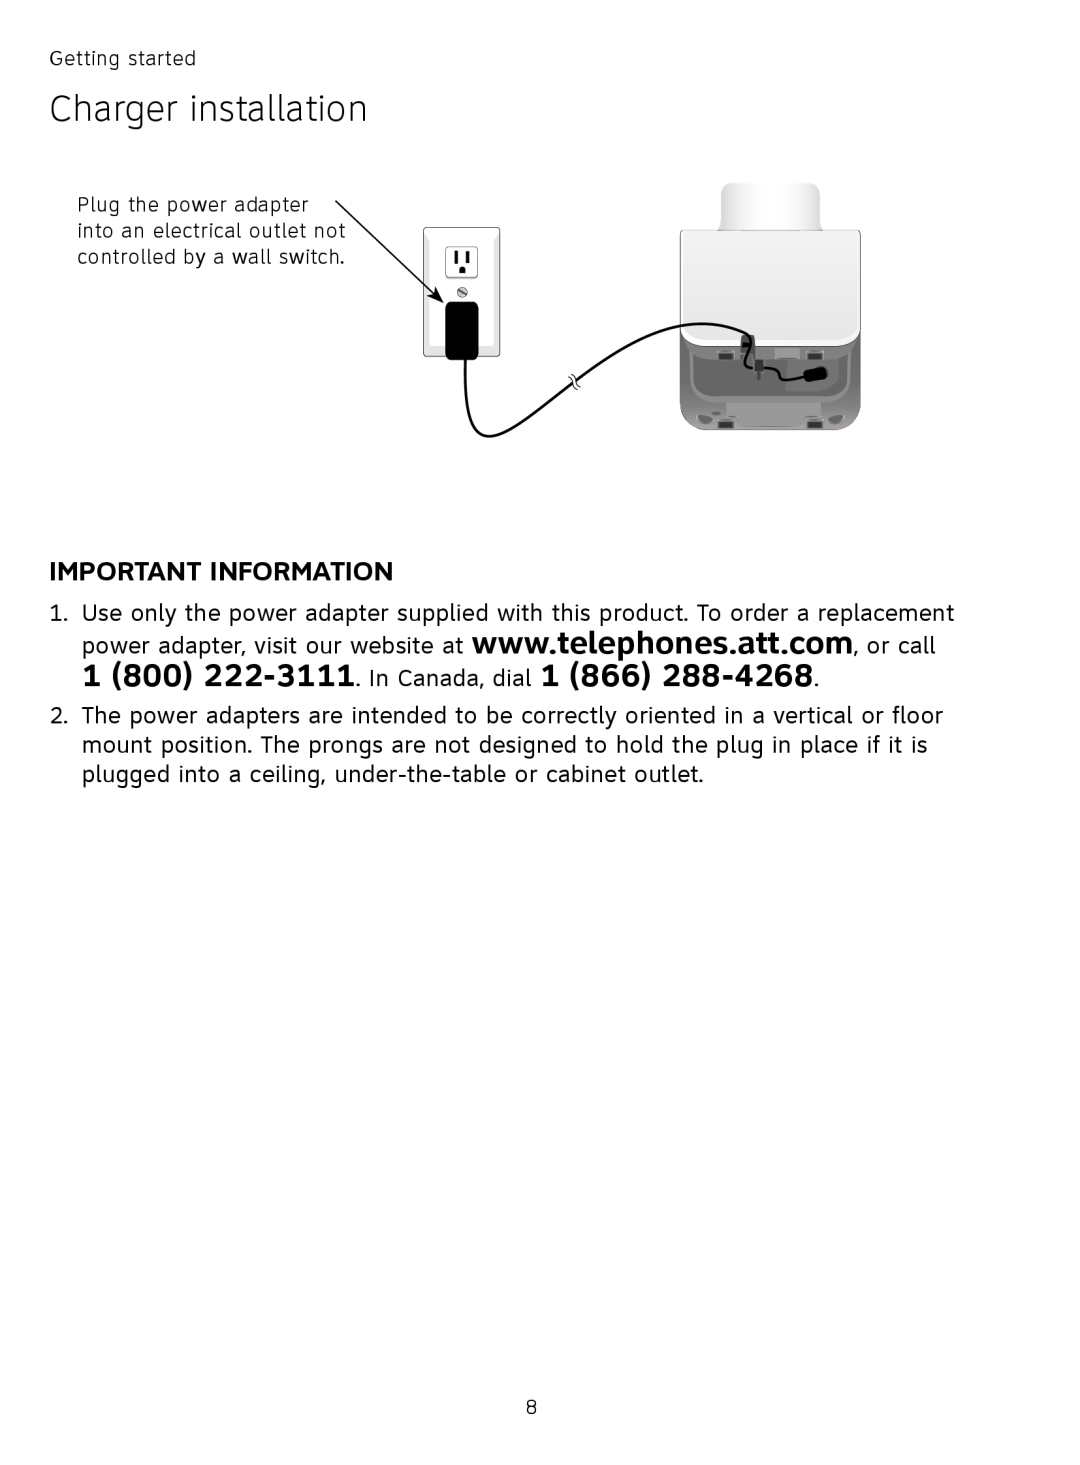 AT&T TL91378, TL9178, TL91178, TL91278 Charger installation, 1 800 222-3111. In Canada, dial 1 866, Important Information 